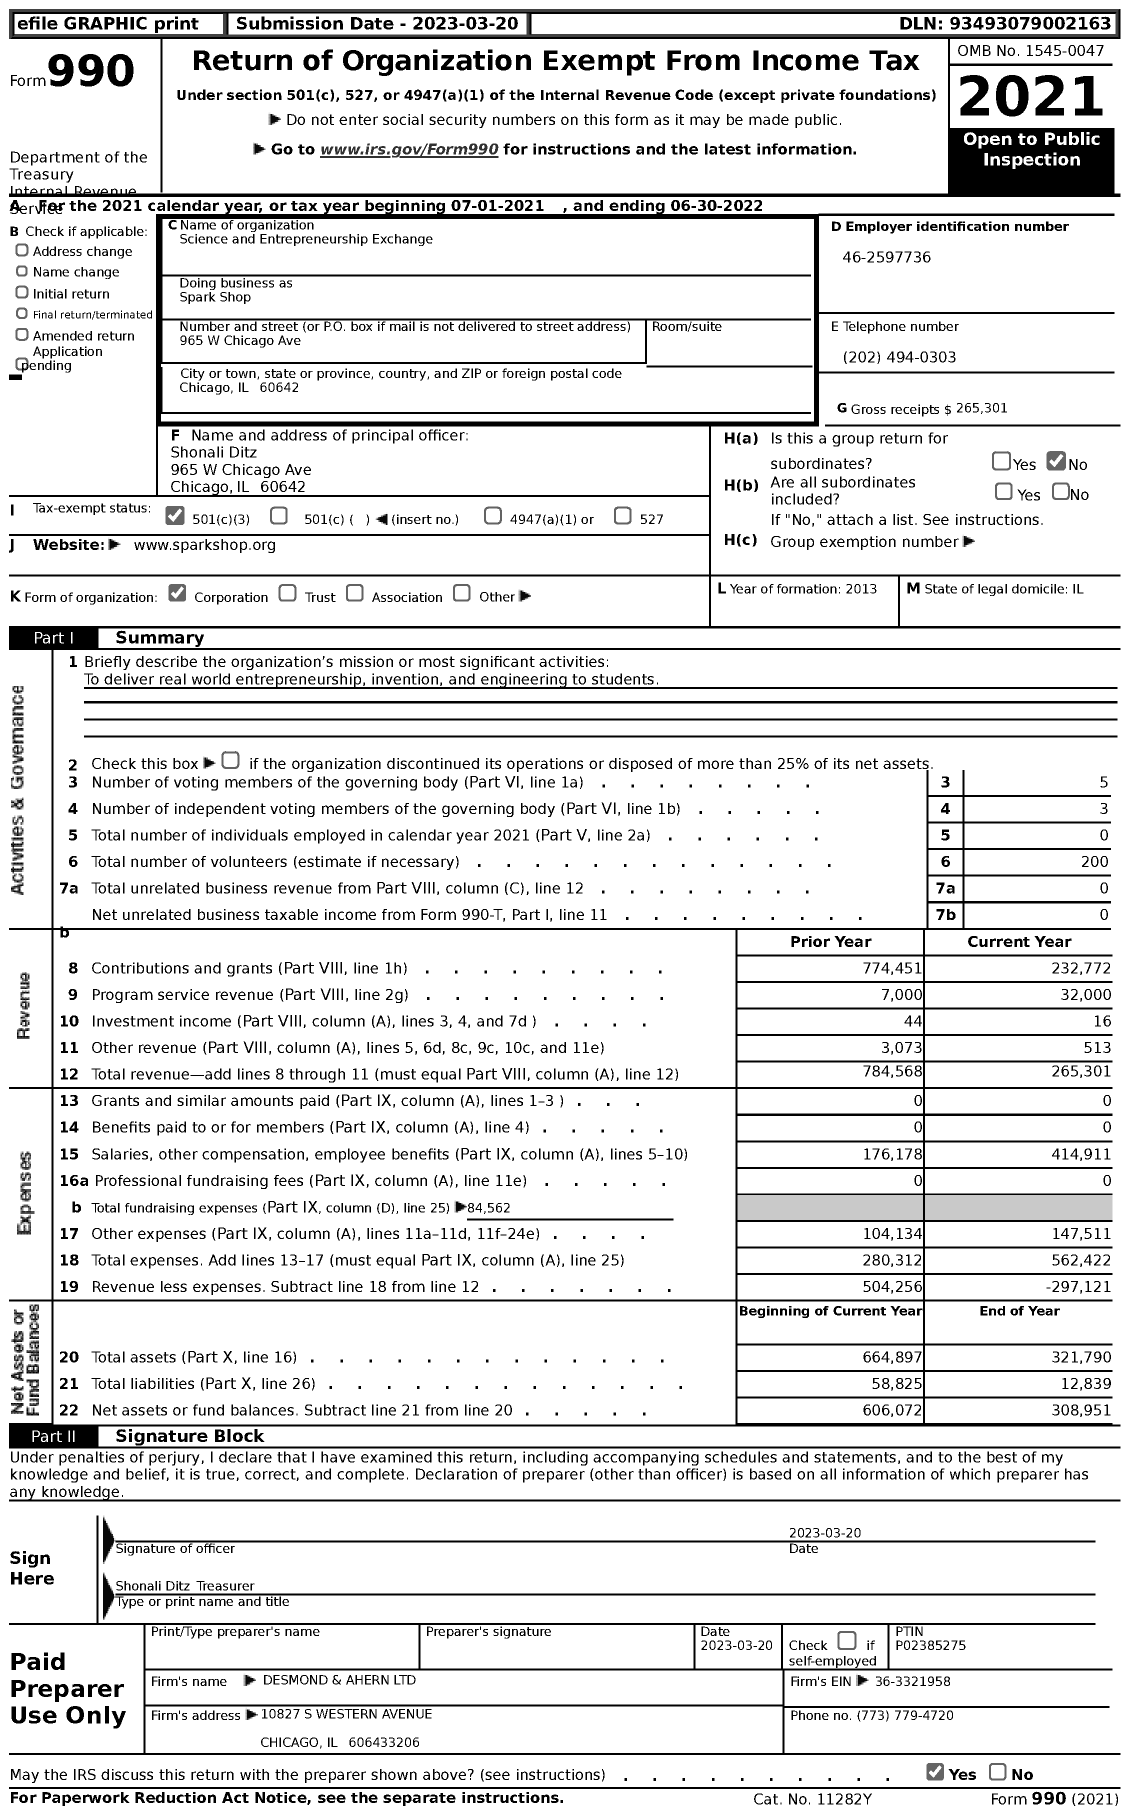 Image of first page of 2021 Form 990 for Spark Shop